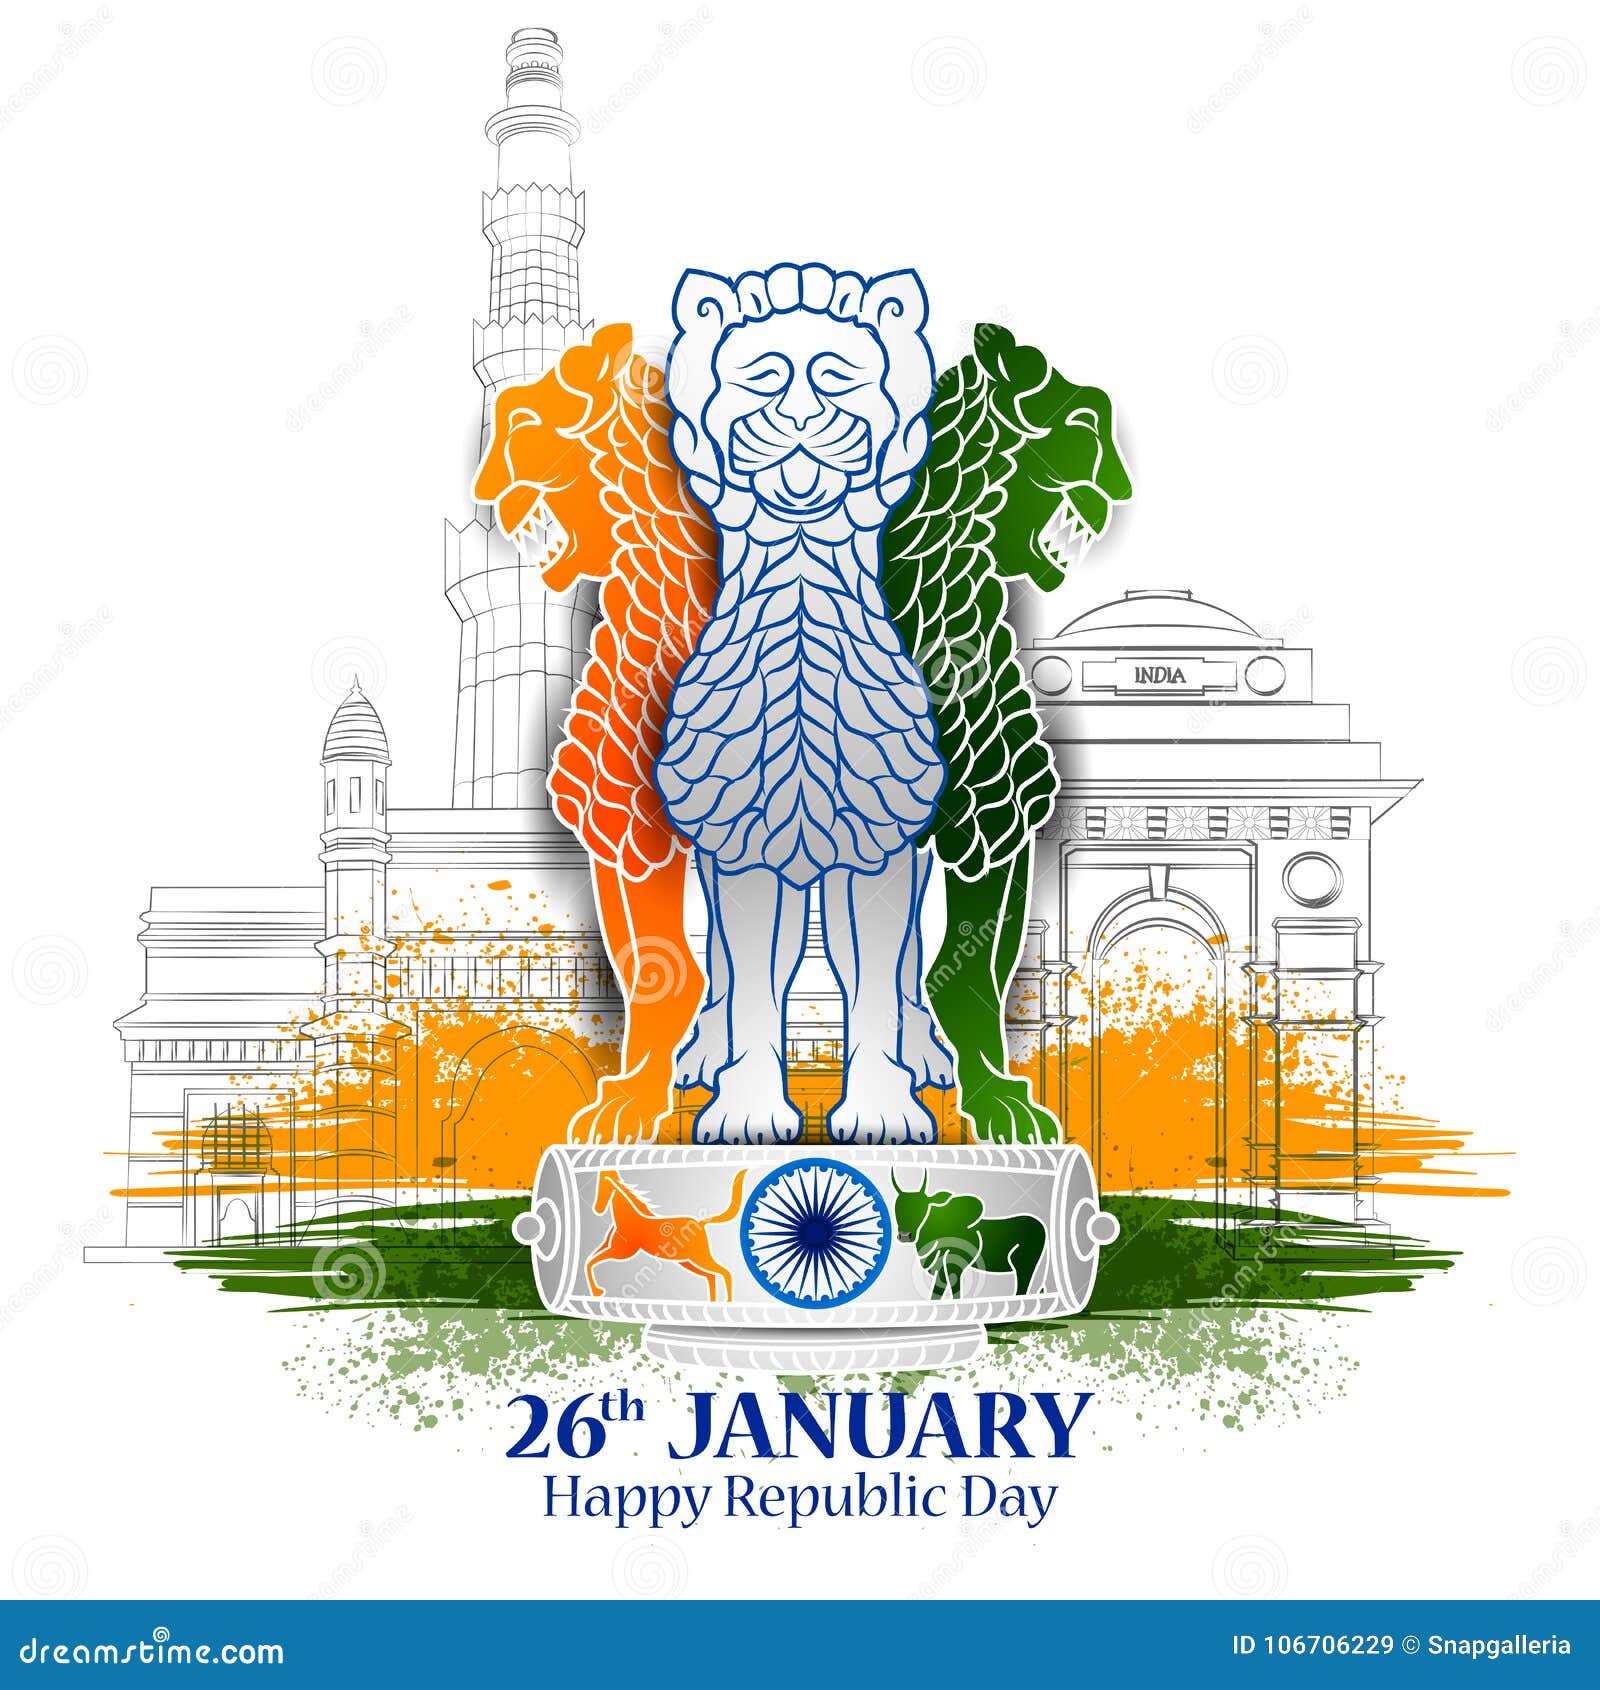 26 January drawing || easy way to draw republic day Red fort with India  flag - YouTube | Flag drawing, Independence day drawing, Easy drawings